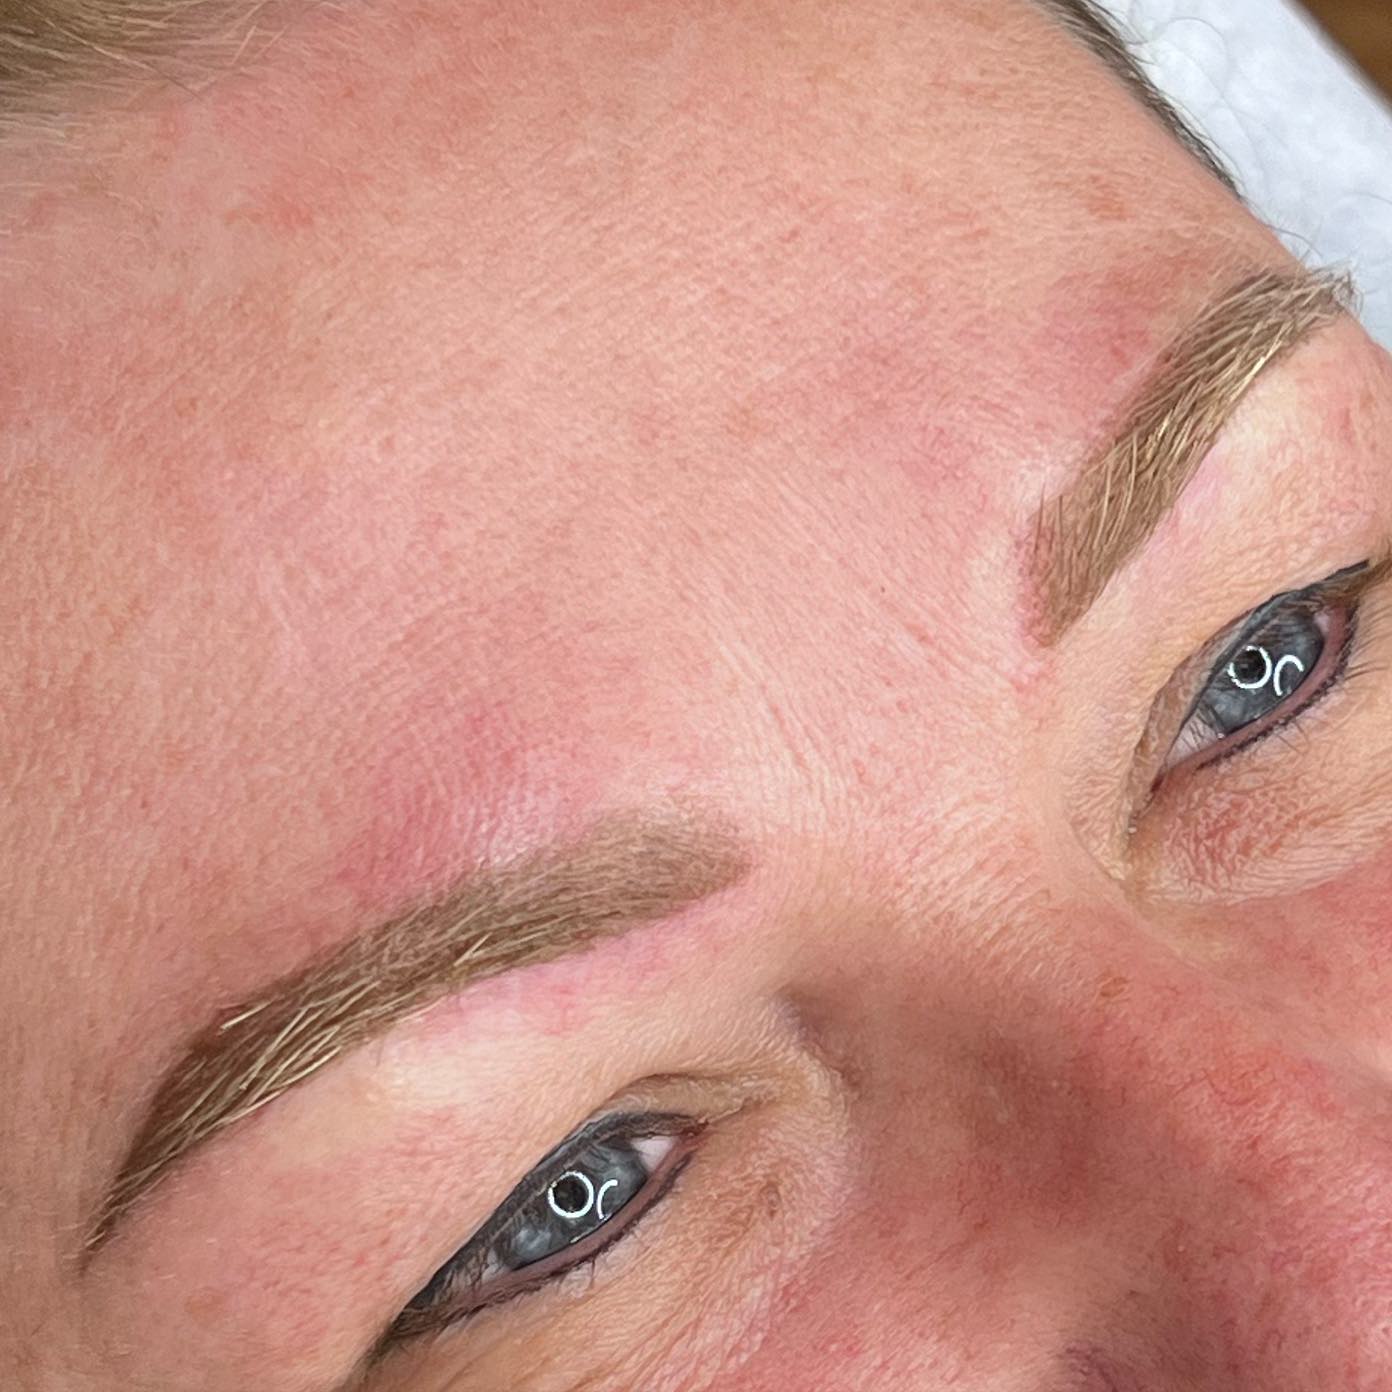 More BLONDIE BROWS
Right off the needle with no filters. No touching up. Just real life. Sometimes you get a little red from my stretching. Sometimes you get a little swelling. But you always get great brows!!!
.
.
.
 #nhwinkbabe #derrynh #londonderrynh #bedfordnh #manchesternh #portsmouthnh #newhampshire #nhbrows #bostonbrows #nhmicroblading #nhombrebrows #nhcosmetictattoo #nhtattoo #nhtattooartist #nhtattoomakeup #nheyelinertattoo #nhbrowartist #nhbrowspecialist #nhmade #nhsalon #nhwinkbrows #nhwinkeyeliner #christinadoesbrows #nheyebrows #nhmakeupartist #nhpermanentmakeup #nhseacoast #nhbrowsalon